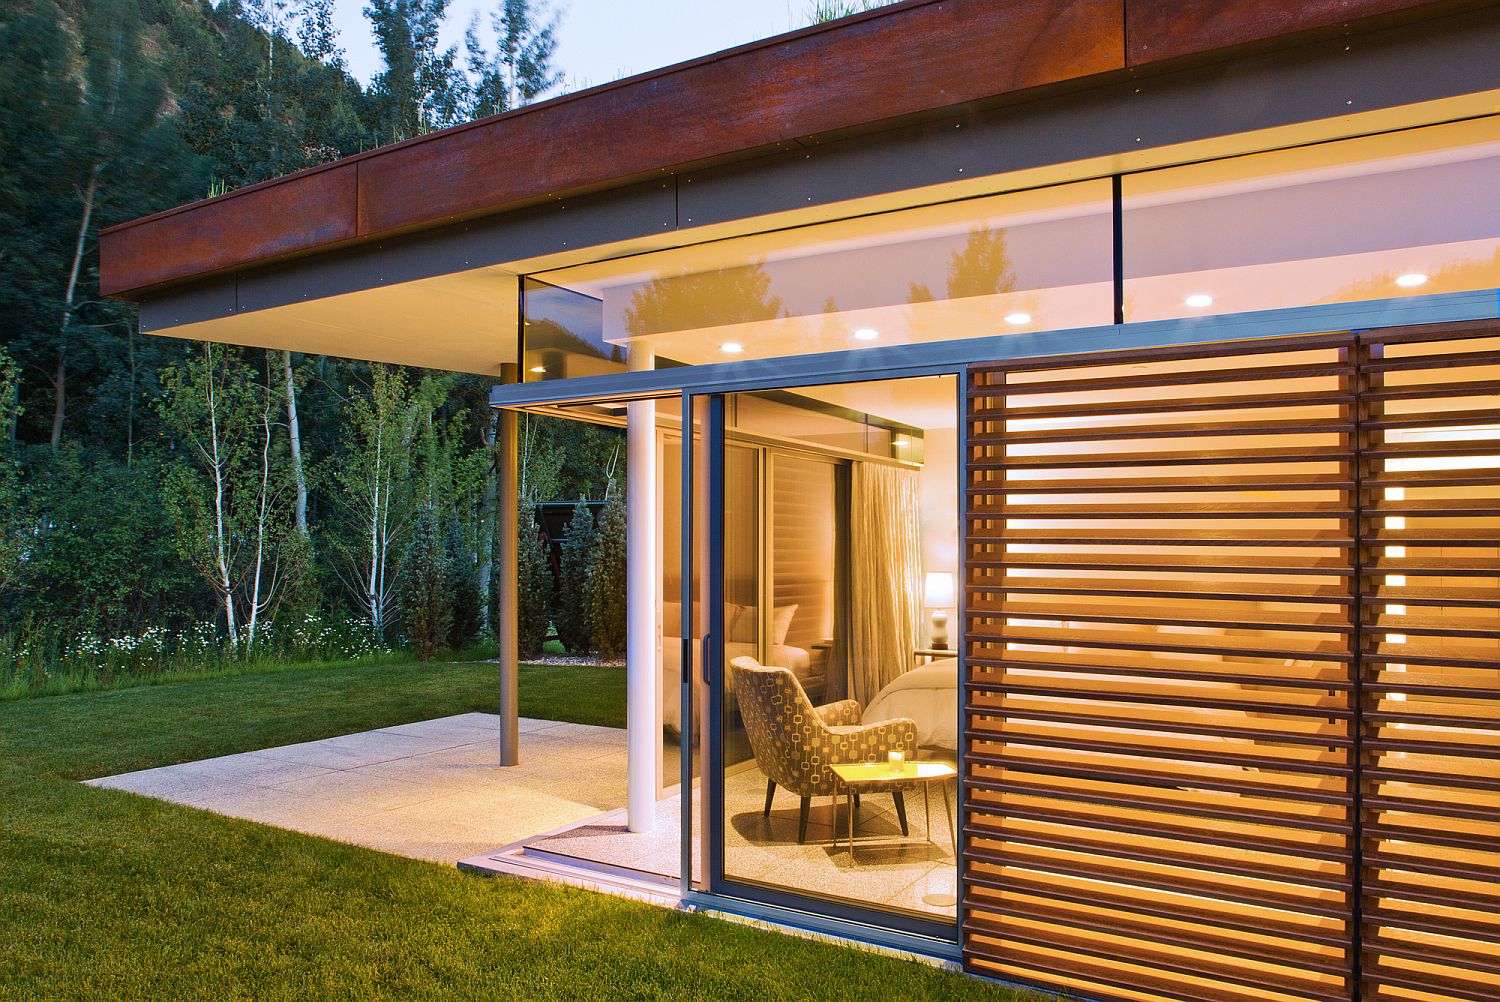 Shutters-and-glass-doors-are-used-cleverly-to-create-balance-between-privacy-and-lovely-views